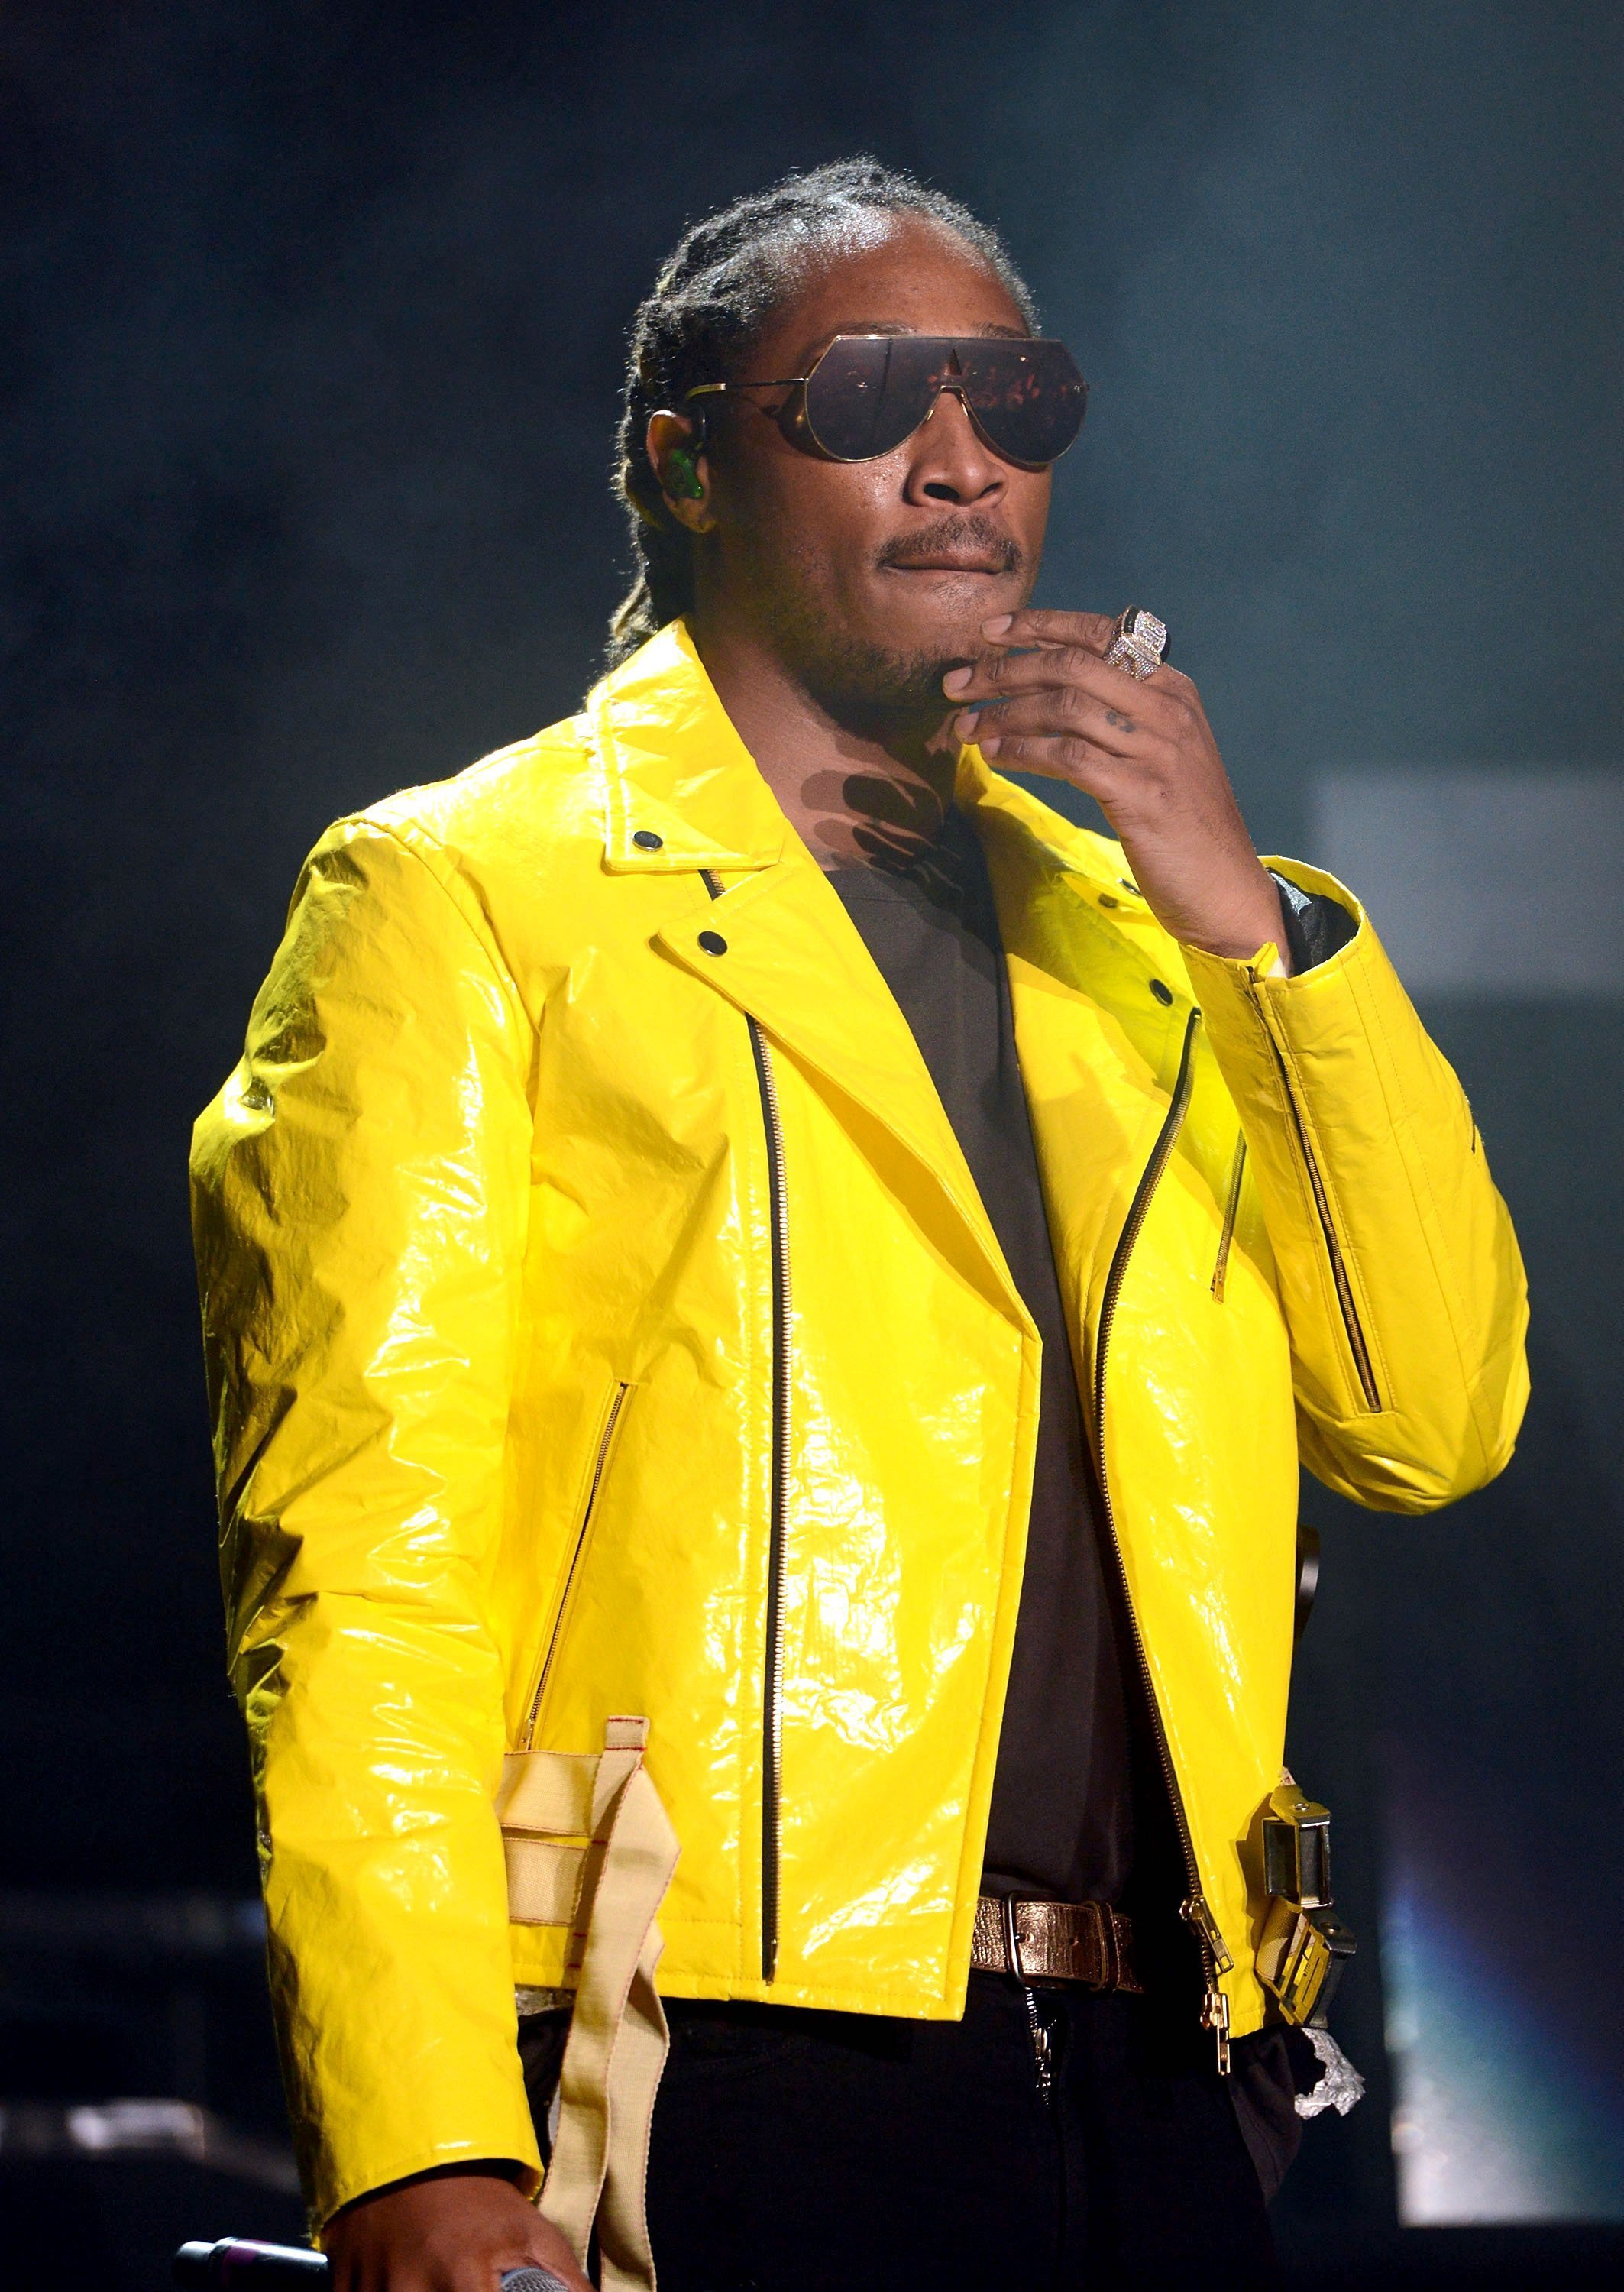 Future during his "Nobody Safe" tour in June 2017. | Photo: Getty Images